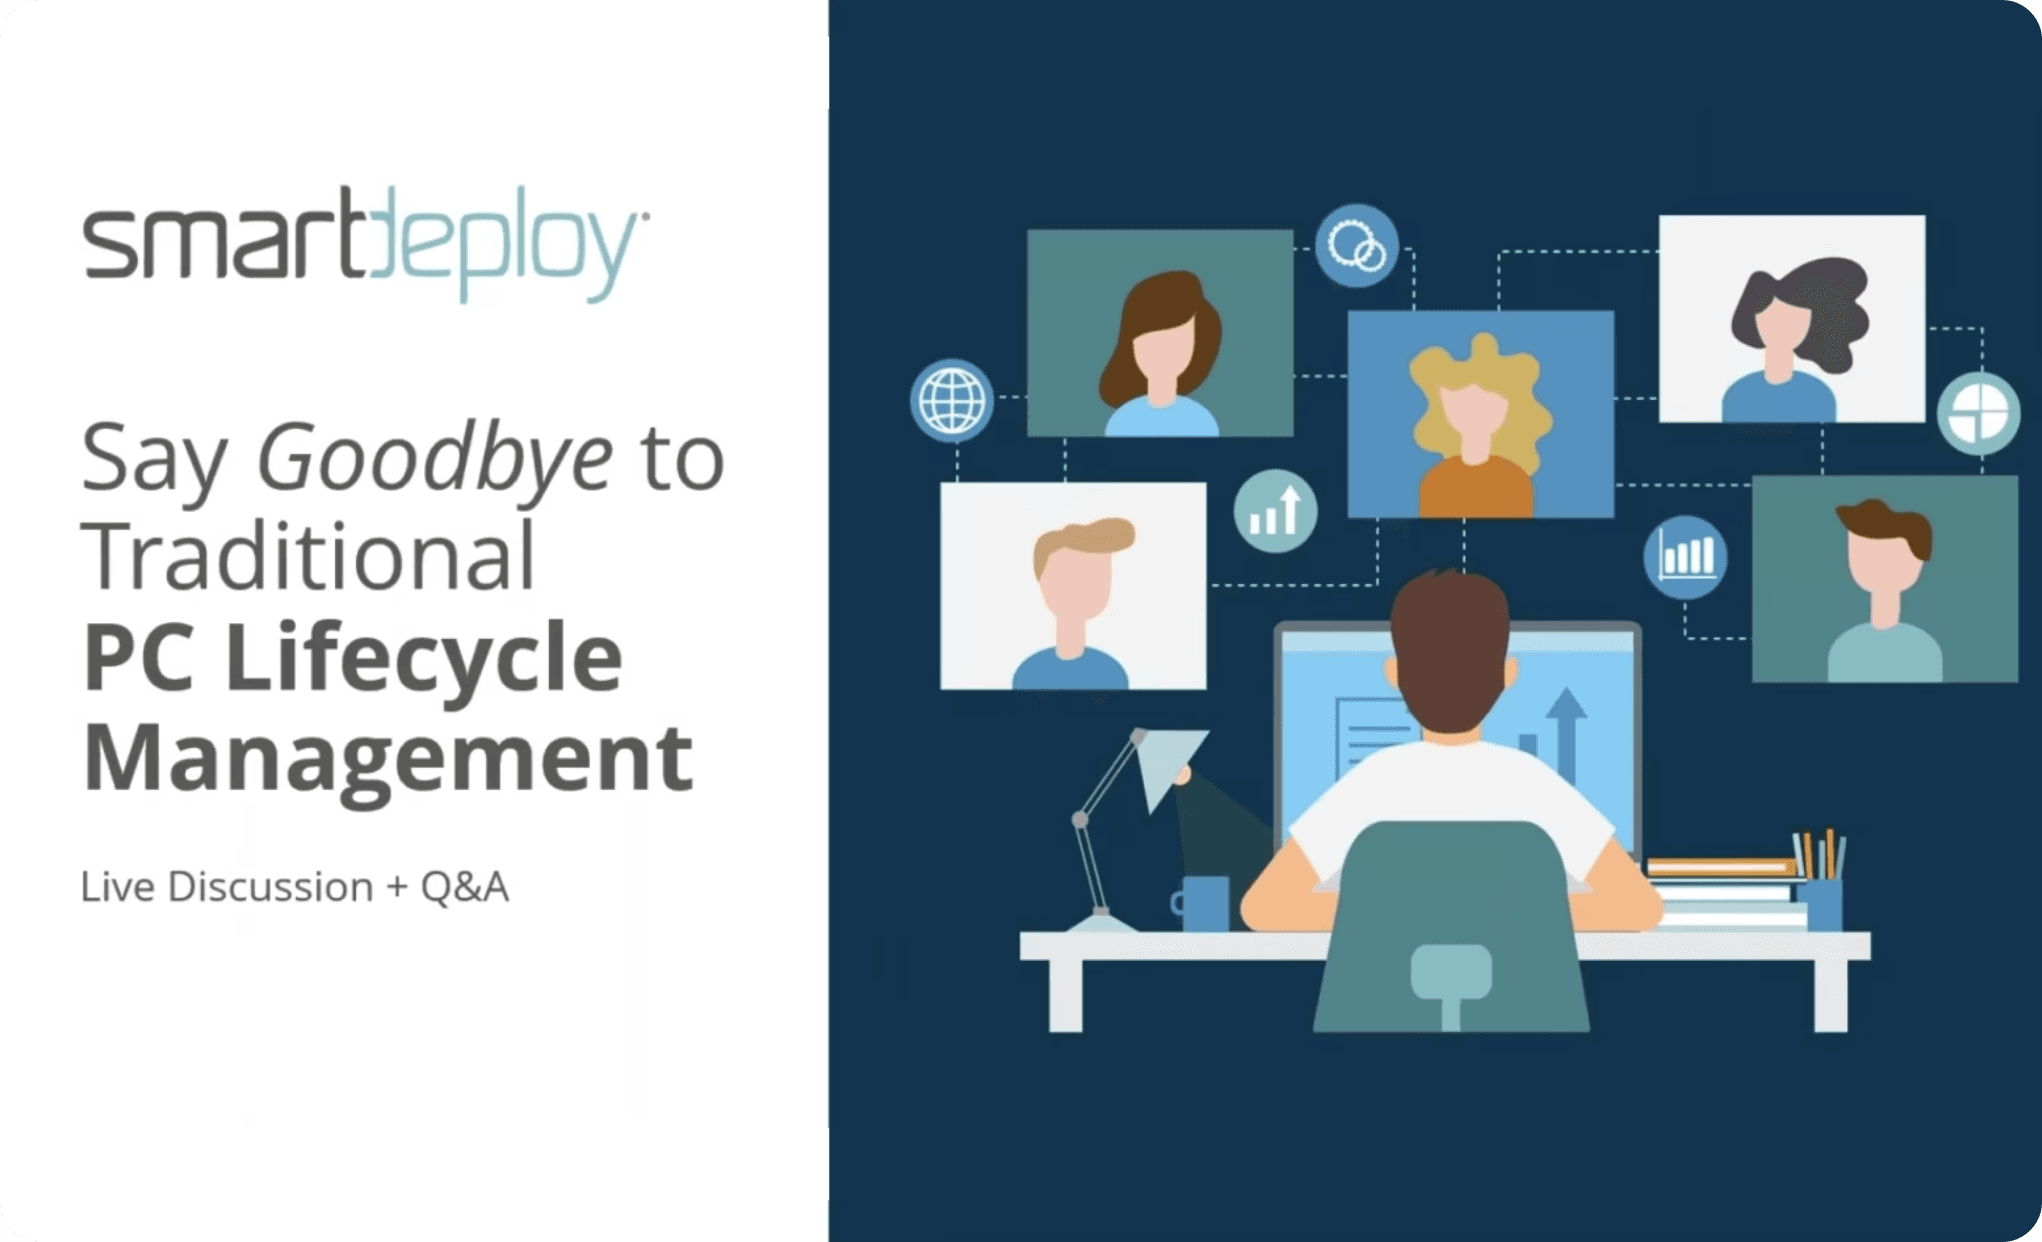 Say goodbye to traditional PC lifecycle management